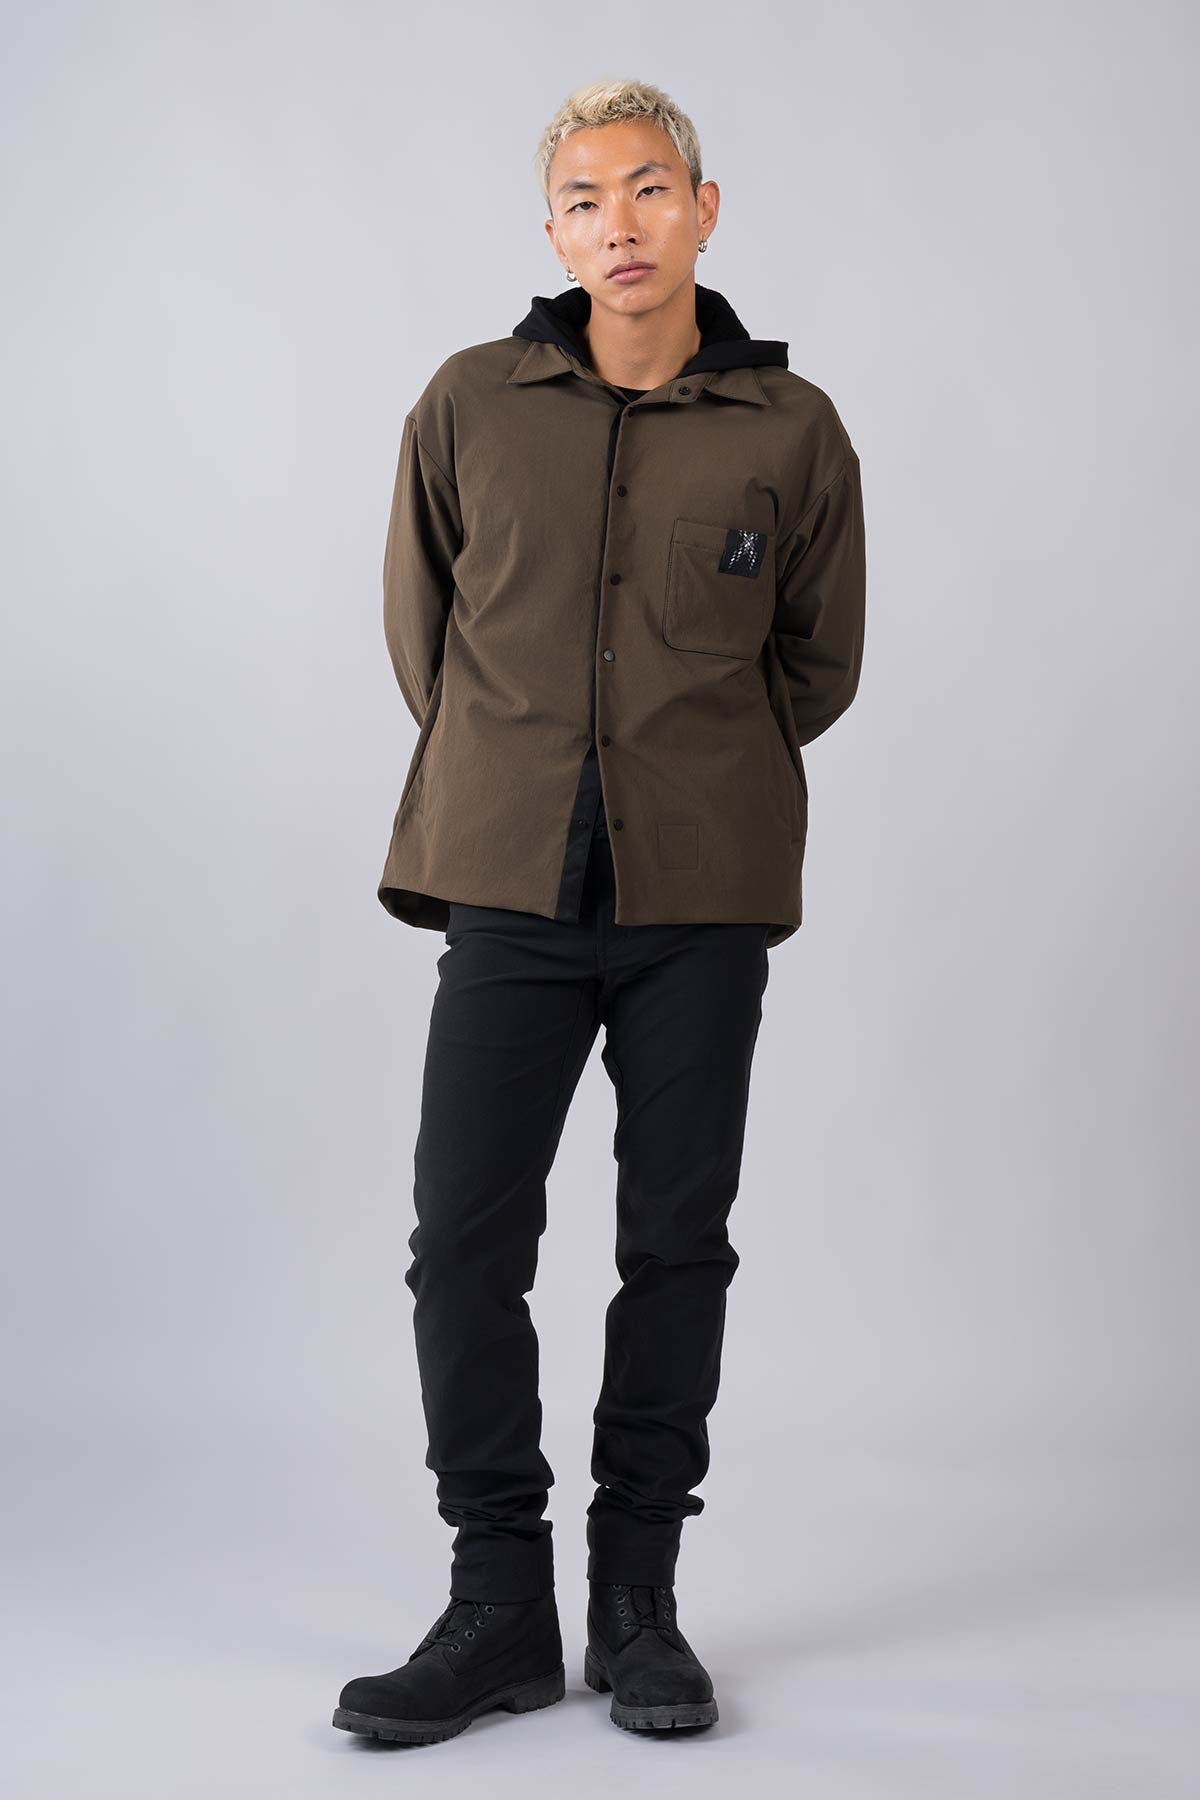 Experiment 399 - Stronghard Hooded Warmshirt